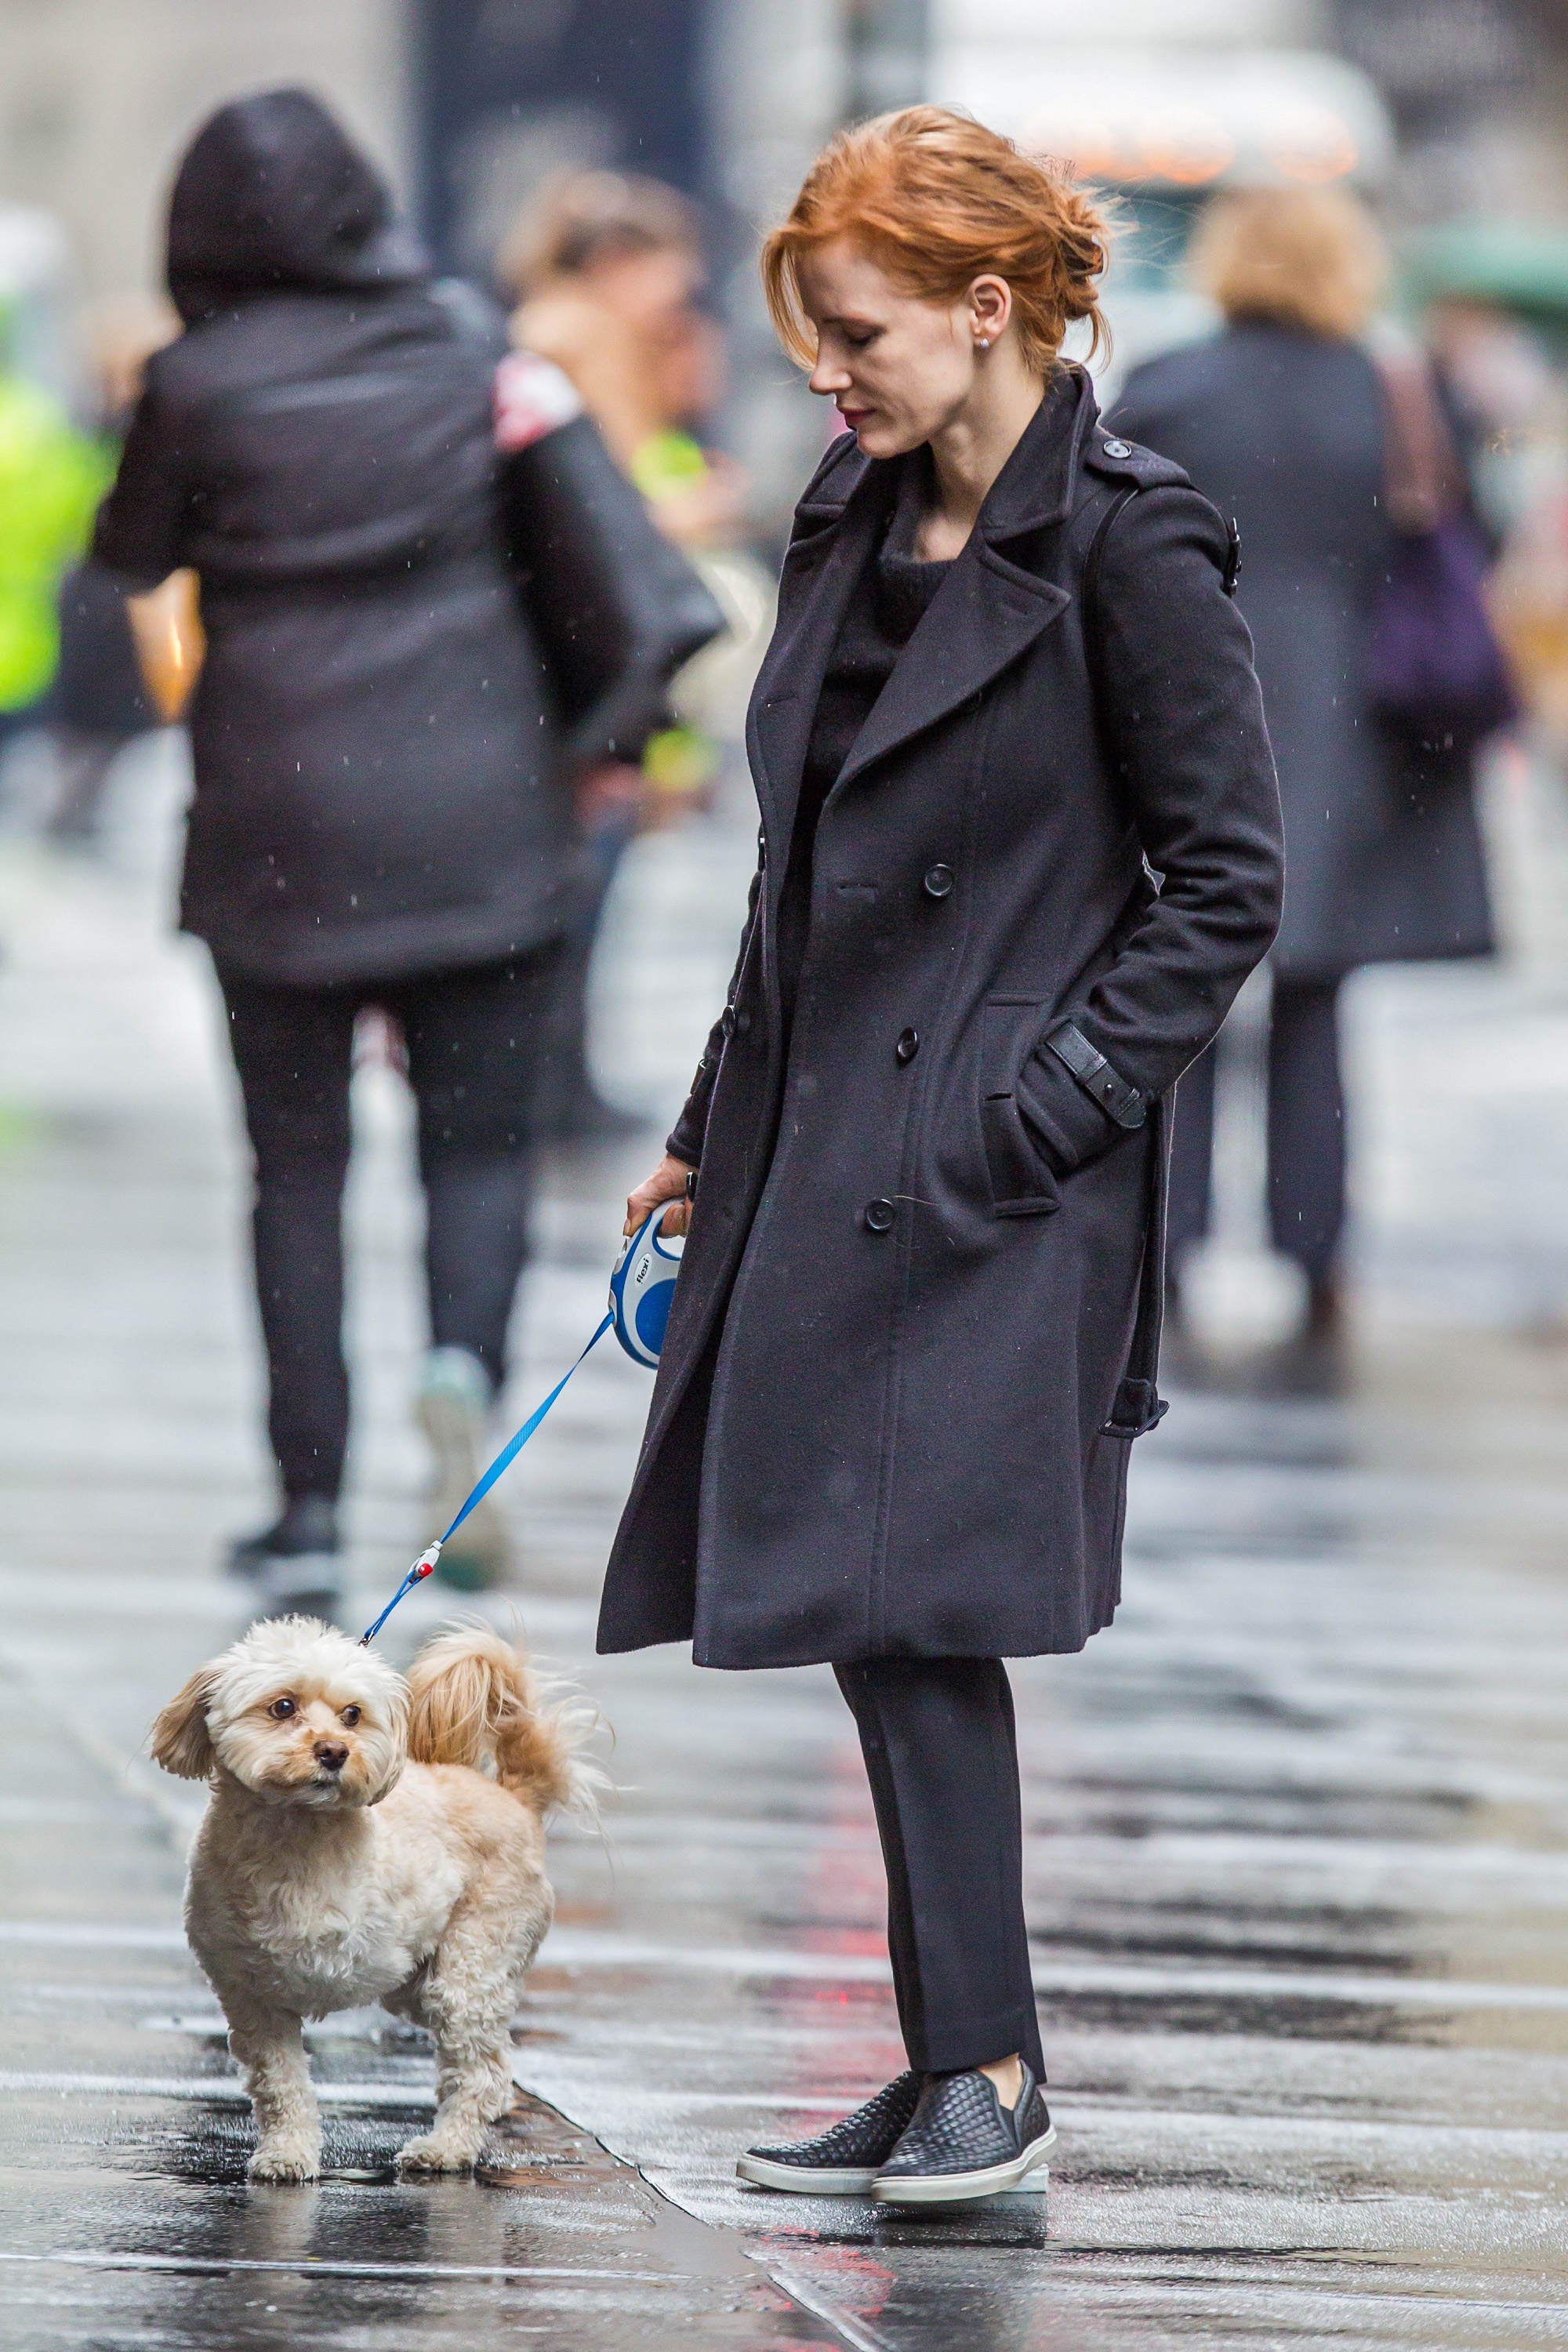 Jessica Chastain And Her Three-Legged Pup, Chaplain